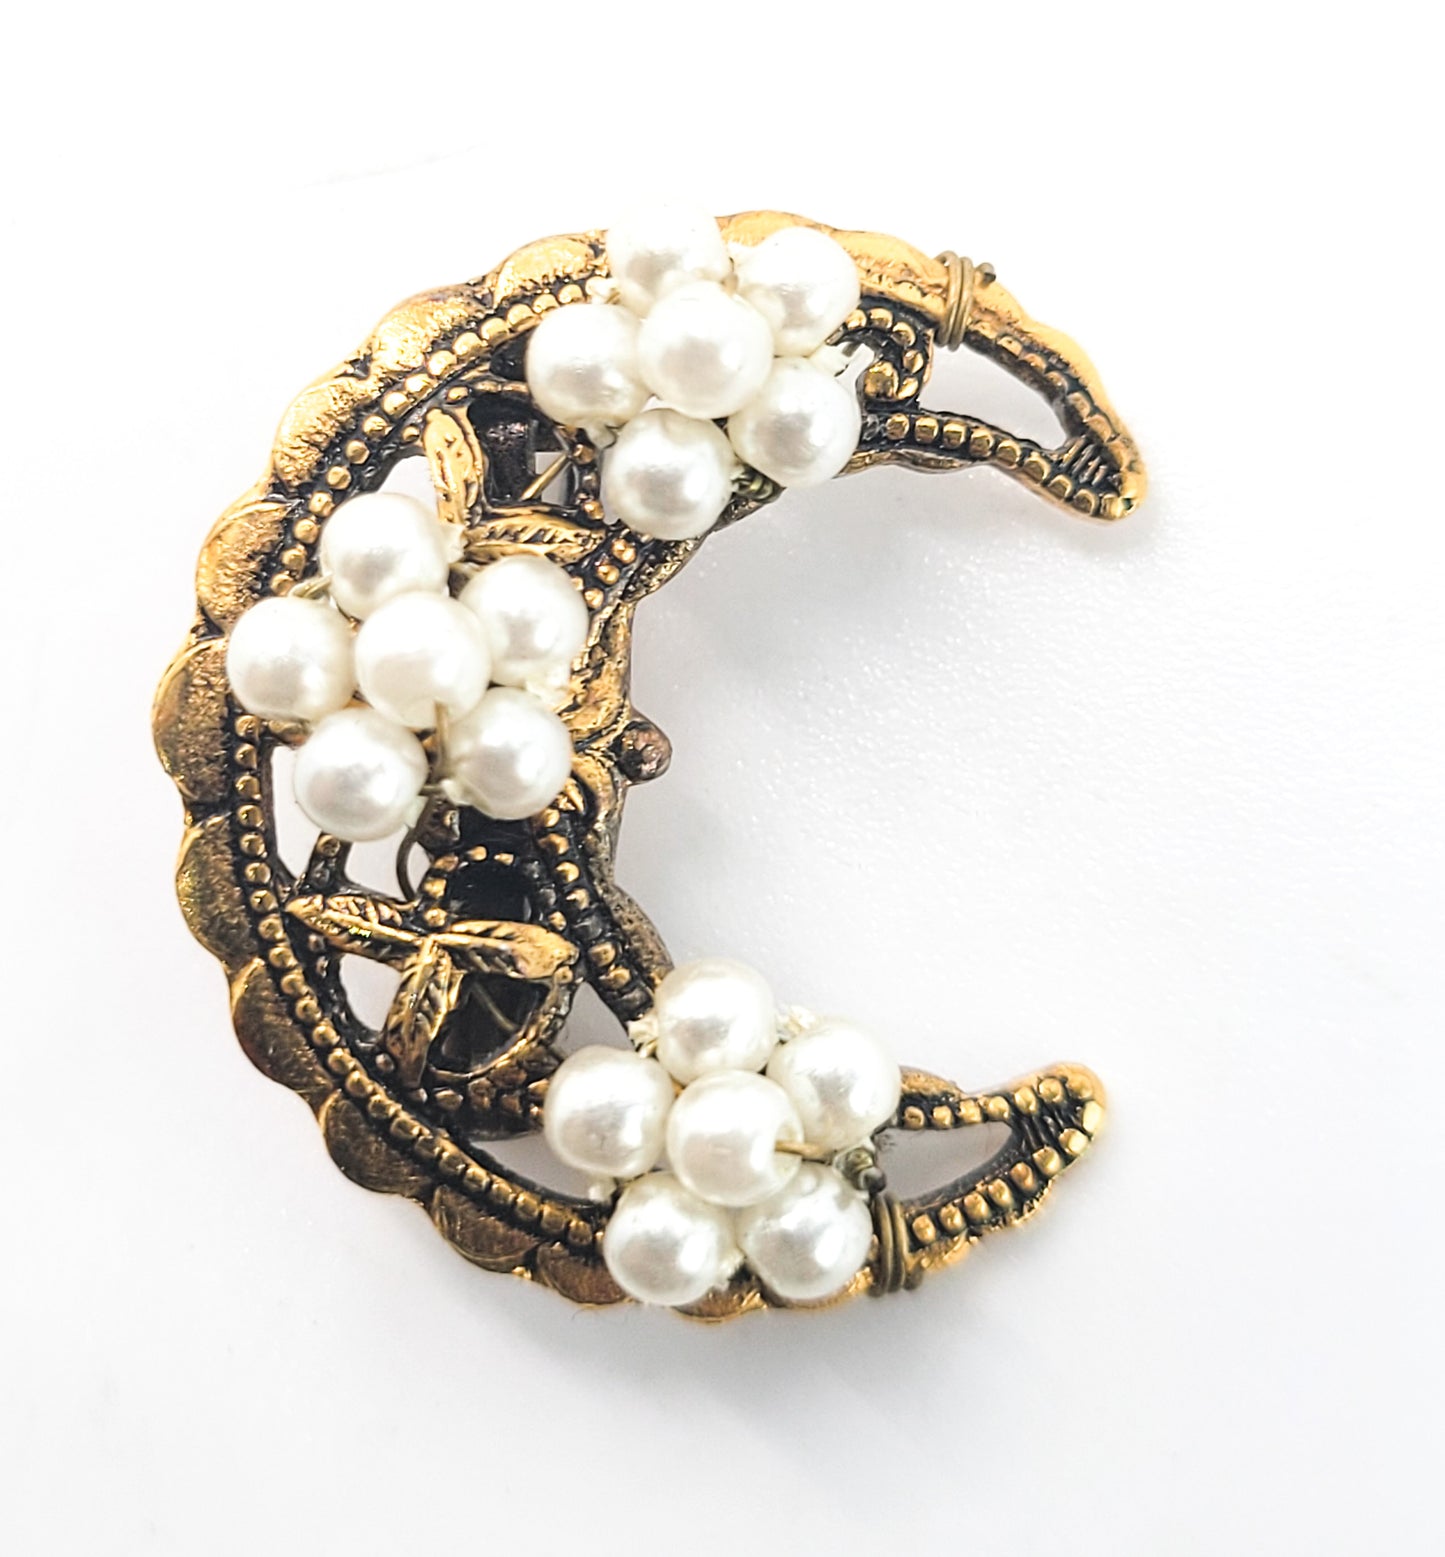 Crescent moon gold toned vintage brooch with beaded white flower accents